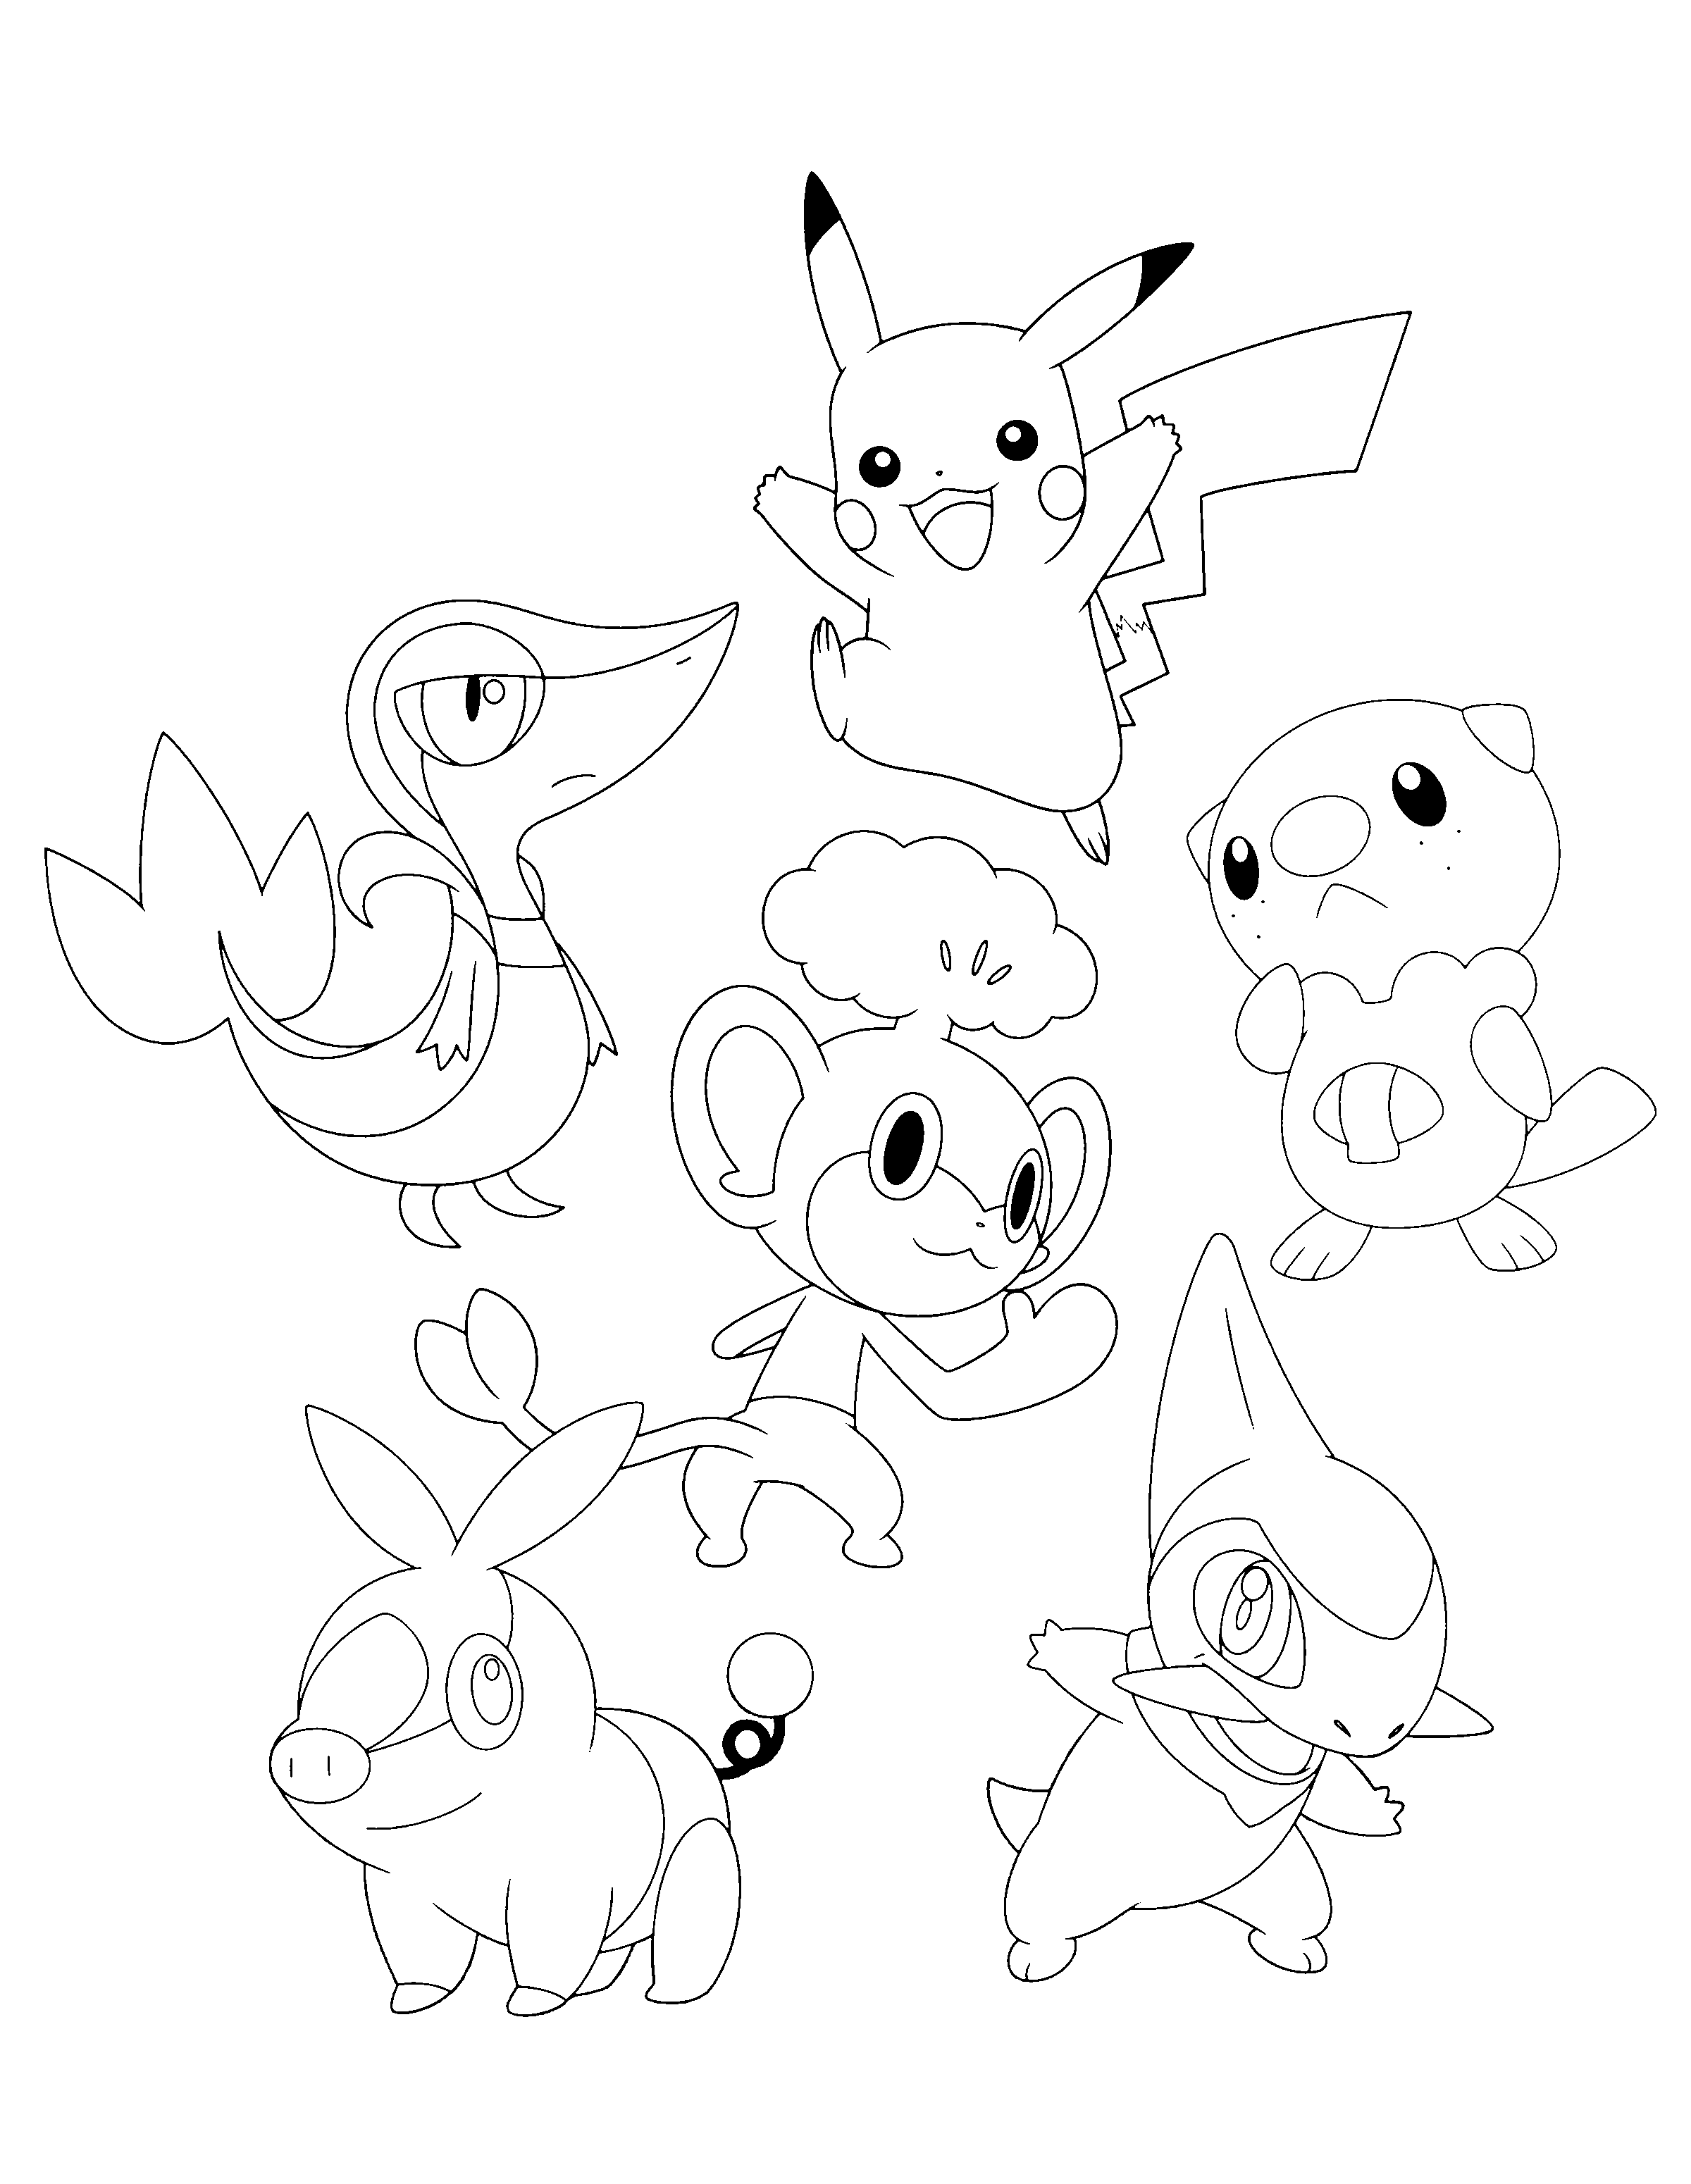 615 Cute Pokemon Snivy Coloring Pages with Animal character